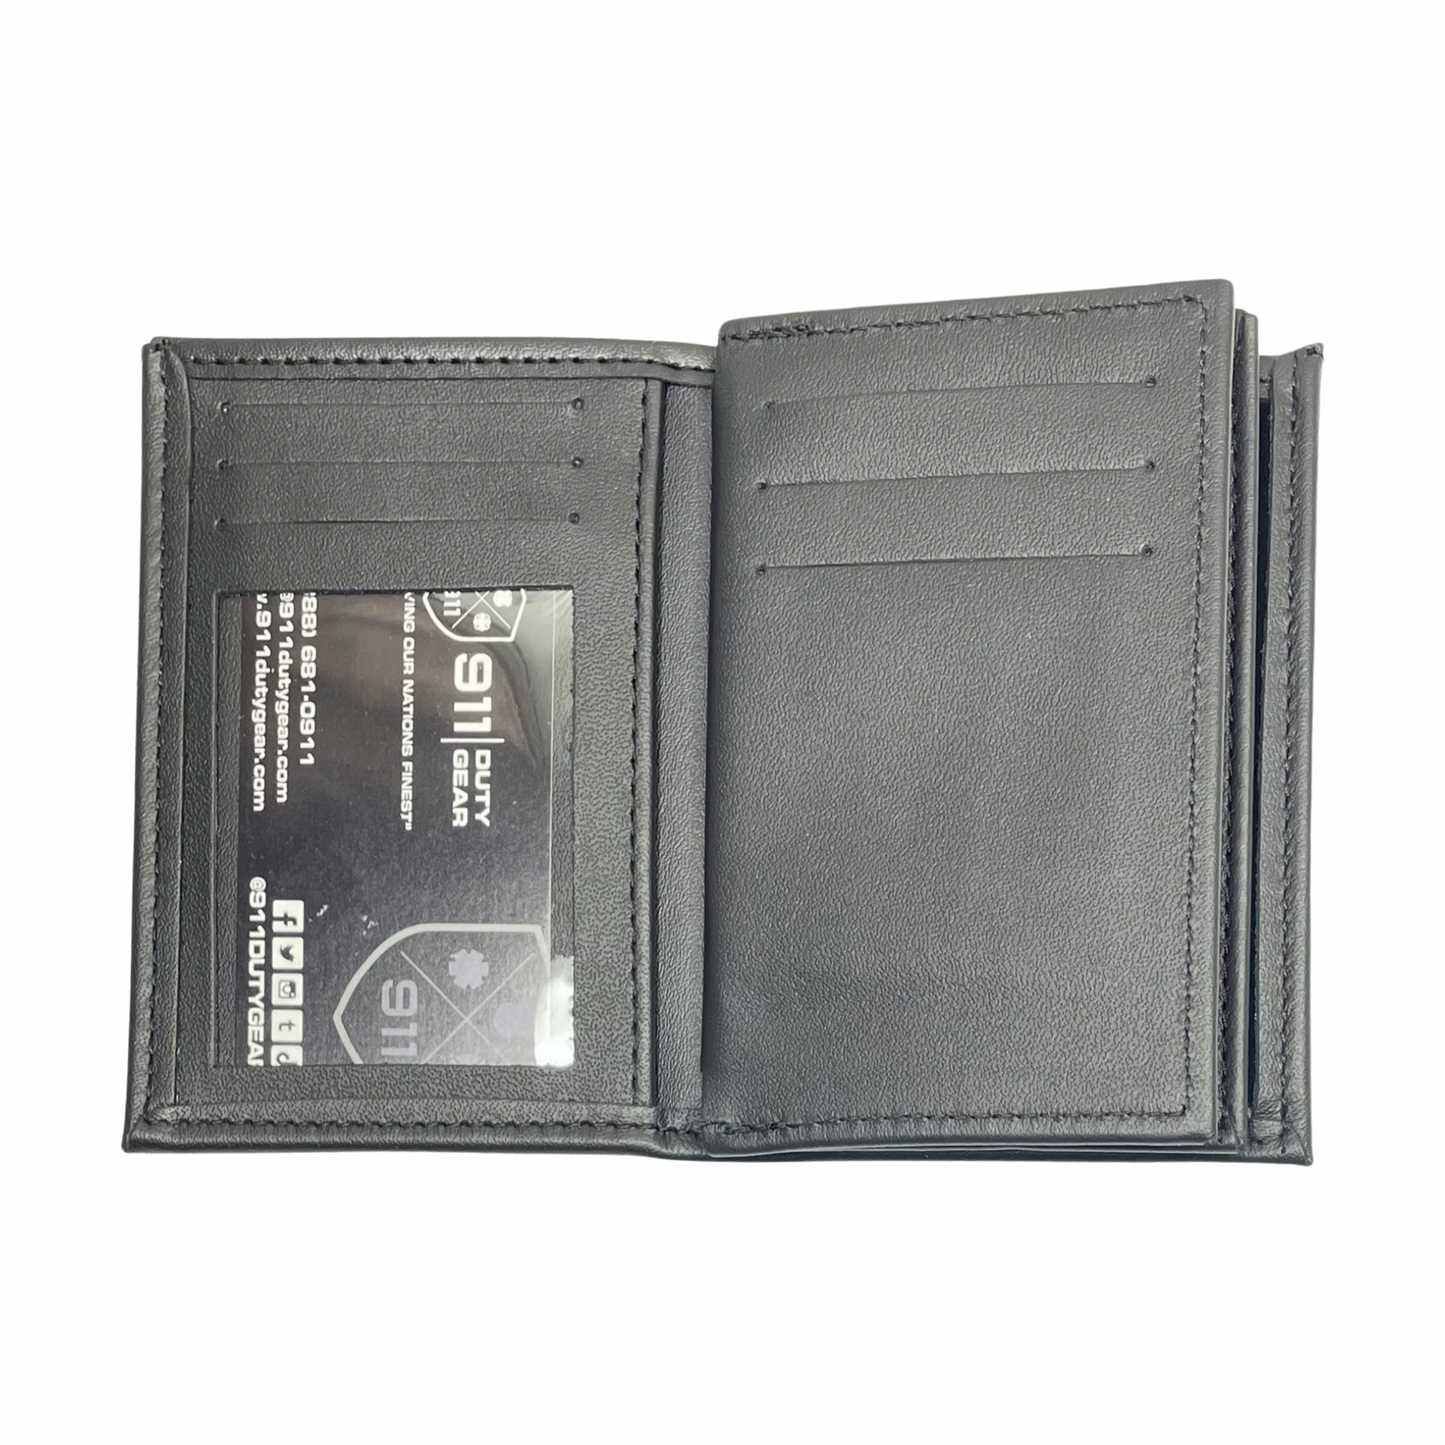 FPS | U.S. Federal Protective Service Horizontal Bifold Double ID Credential & Hidden (2.5in) Badge Wallet-Perfect Fit-911 Duty Gear USA